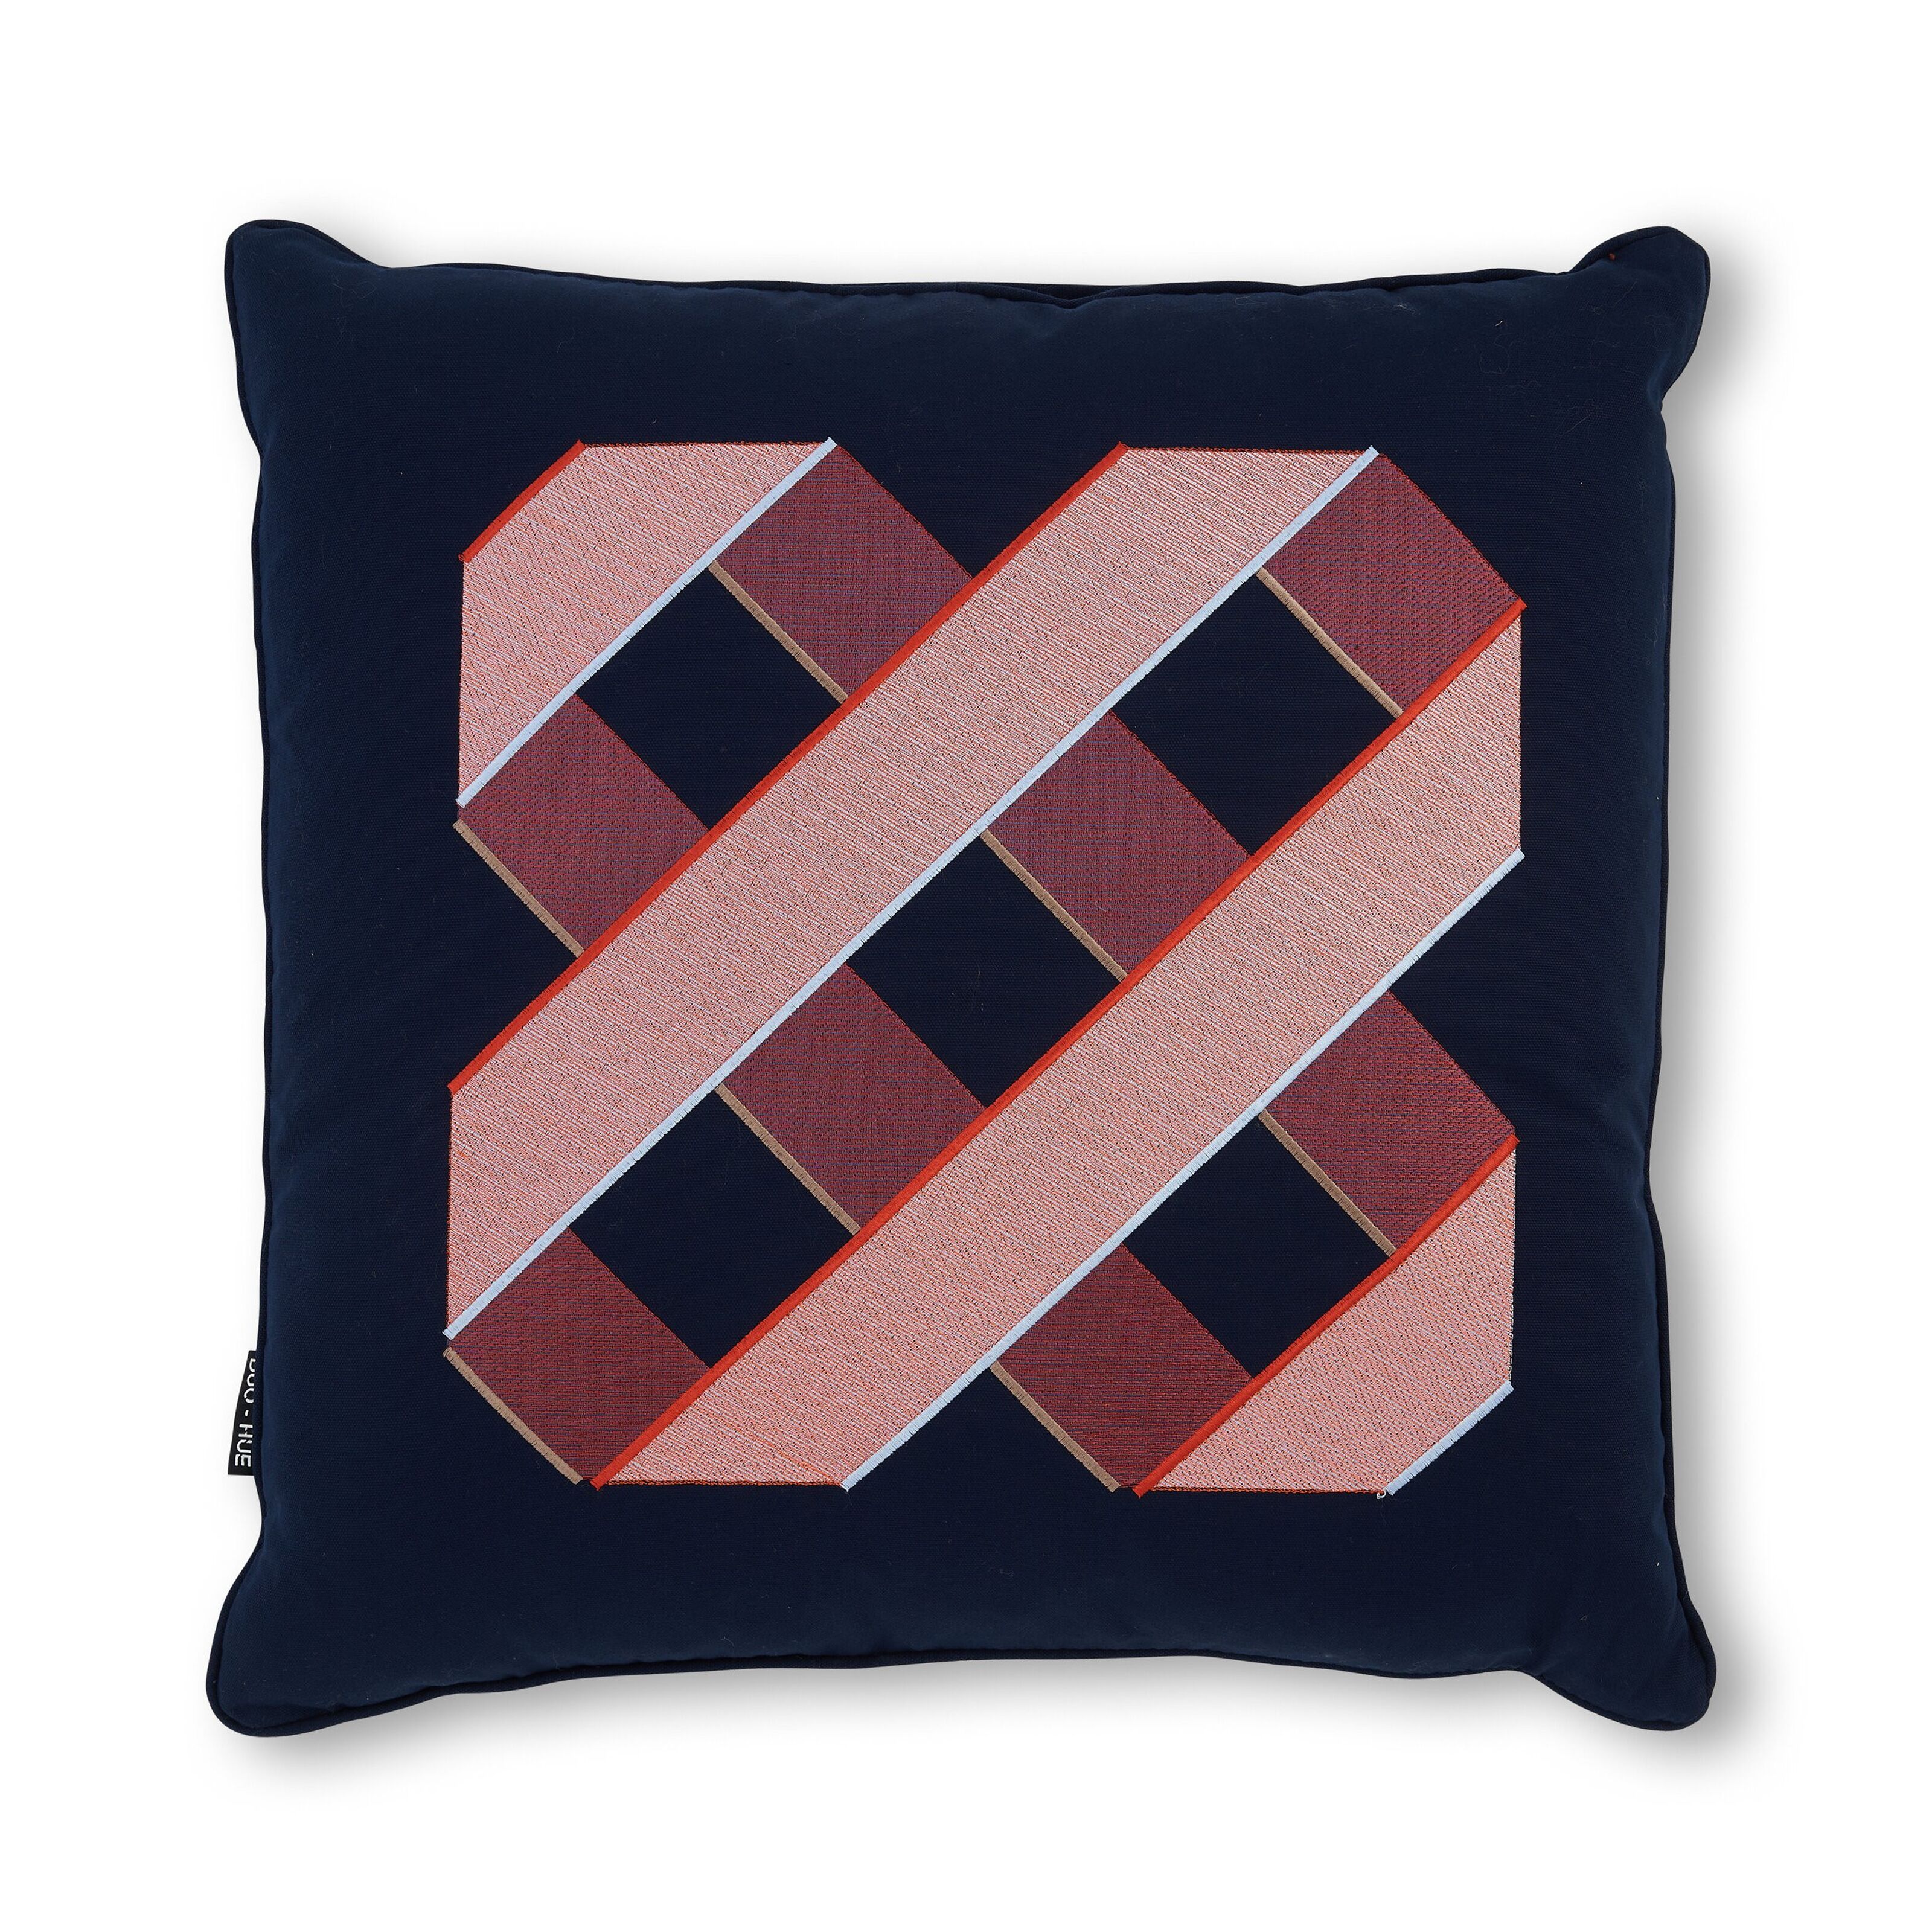 Alex 510914 Convoluted Donut Cushion Navy - 14 in.